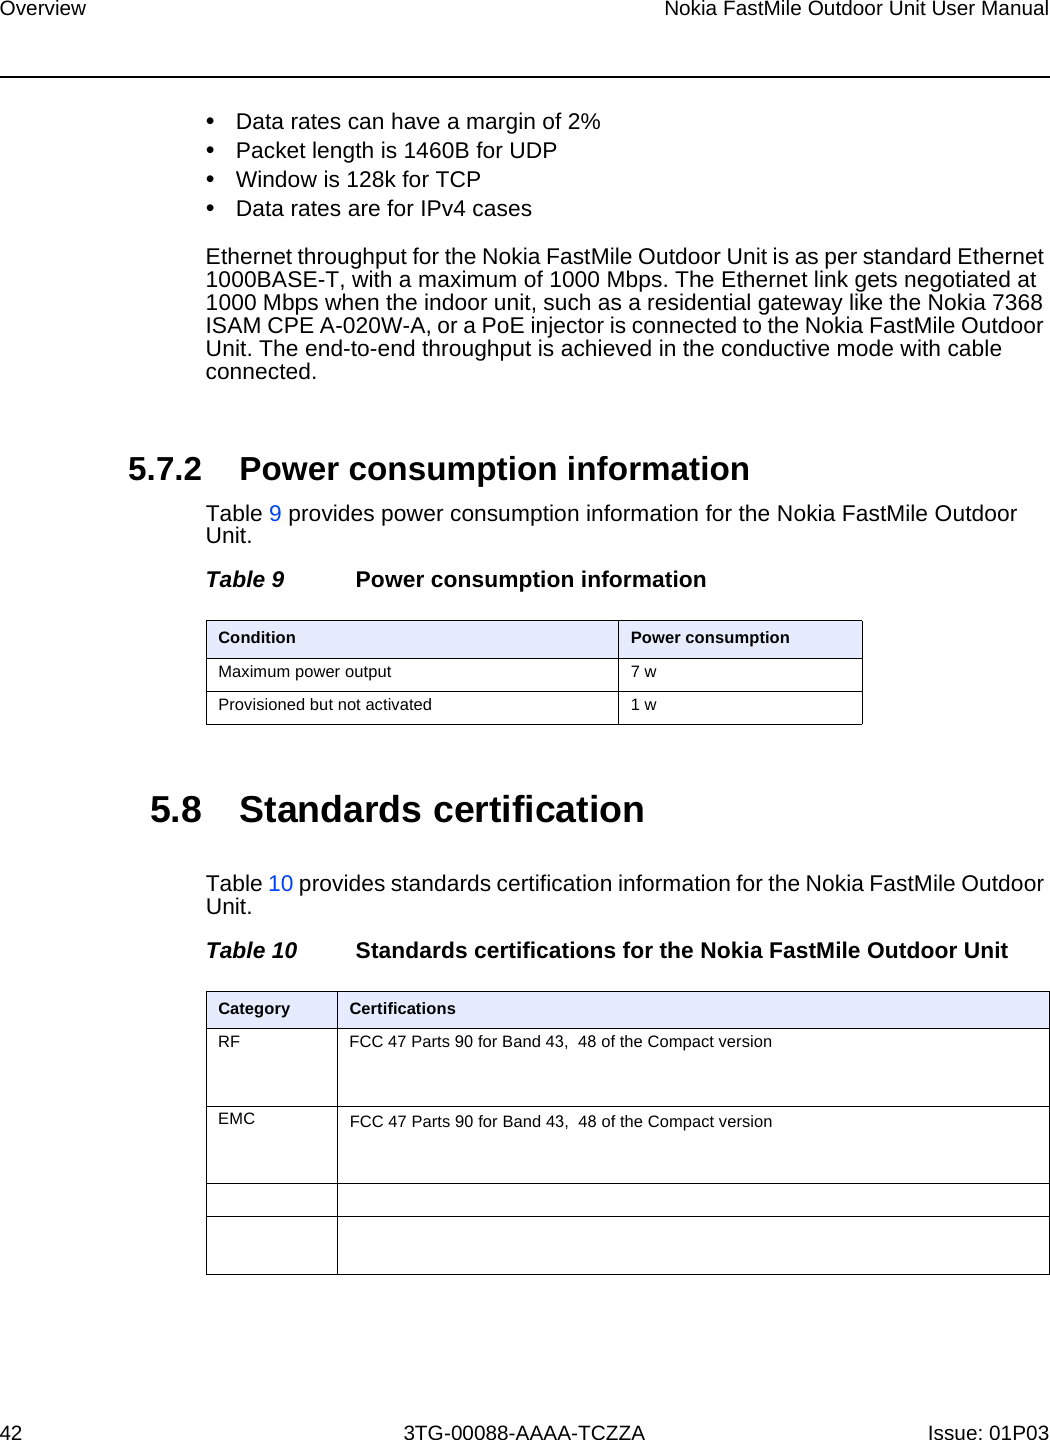 Page 38 of Nokia Bell 34003800FM20 FastMile Compact User Manual Nokia FastMile Outdoor Unit